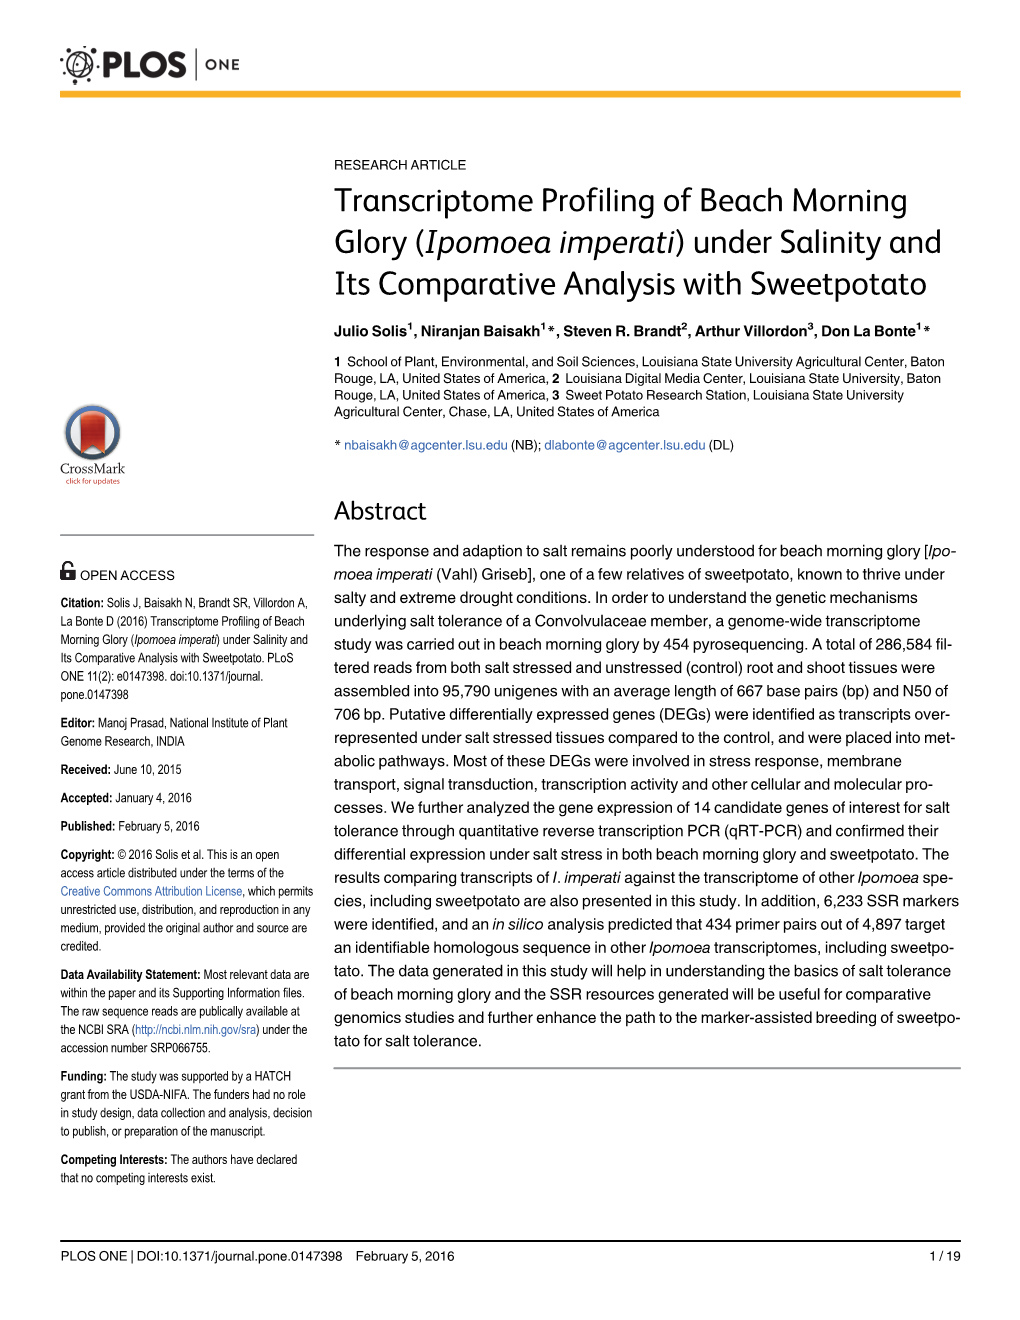 Transcriptome Profiling of Beach Morning Glory (Ipomoea Imperati) Under Salinity and Its Comparative Analysis with Sweetpotato